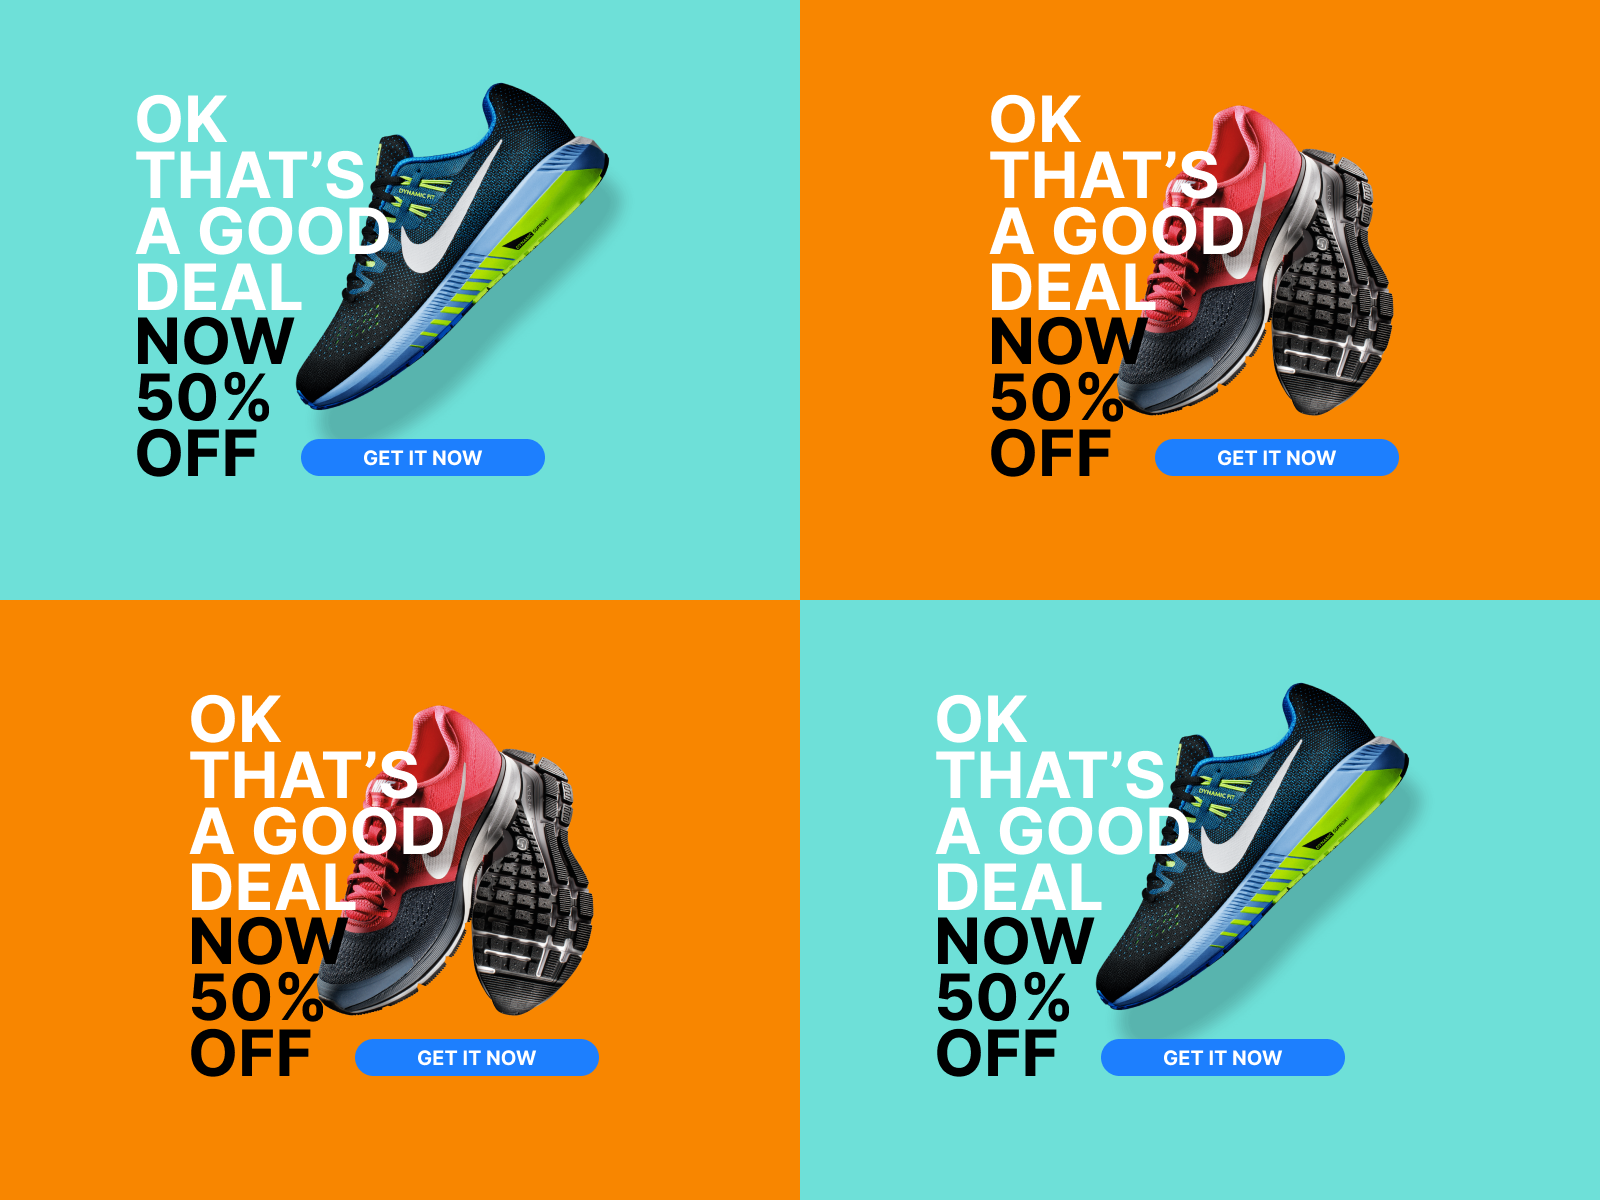 NIKE Special Offer by Maxime Tixidre on Dribbble